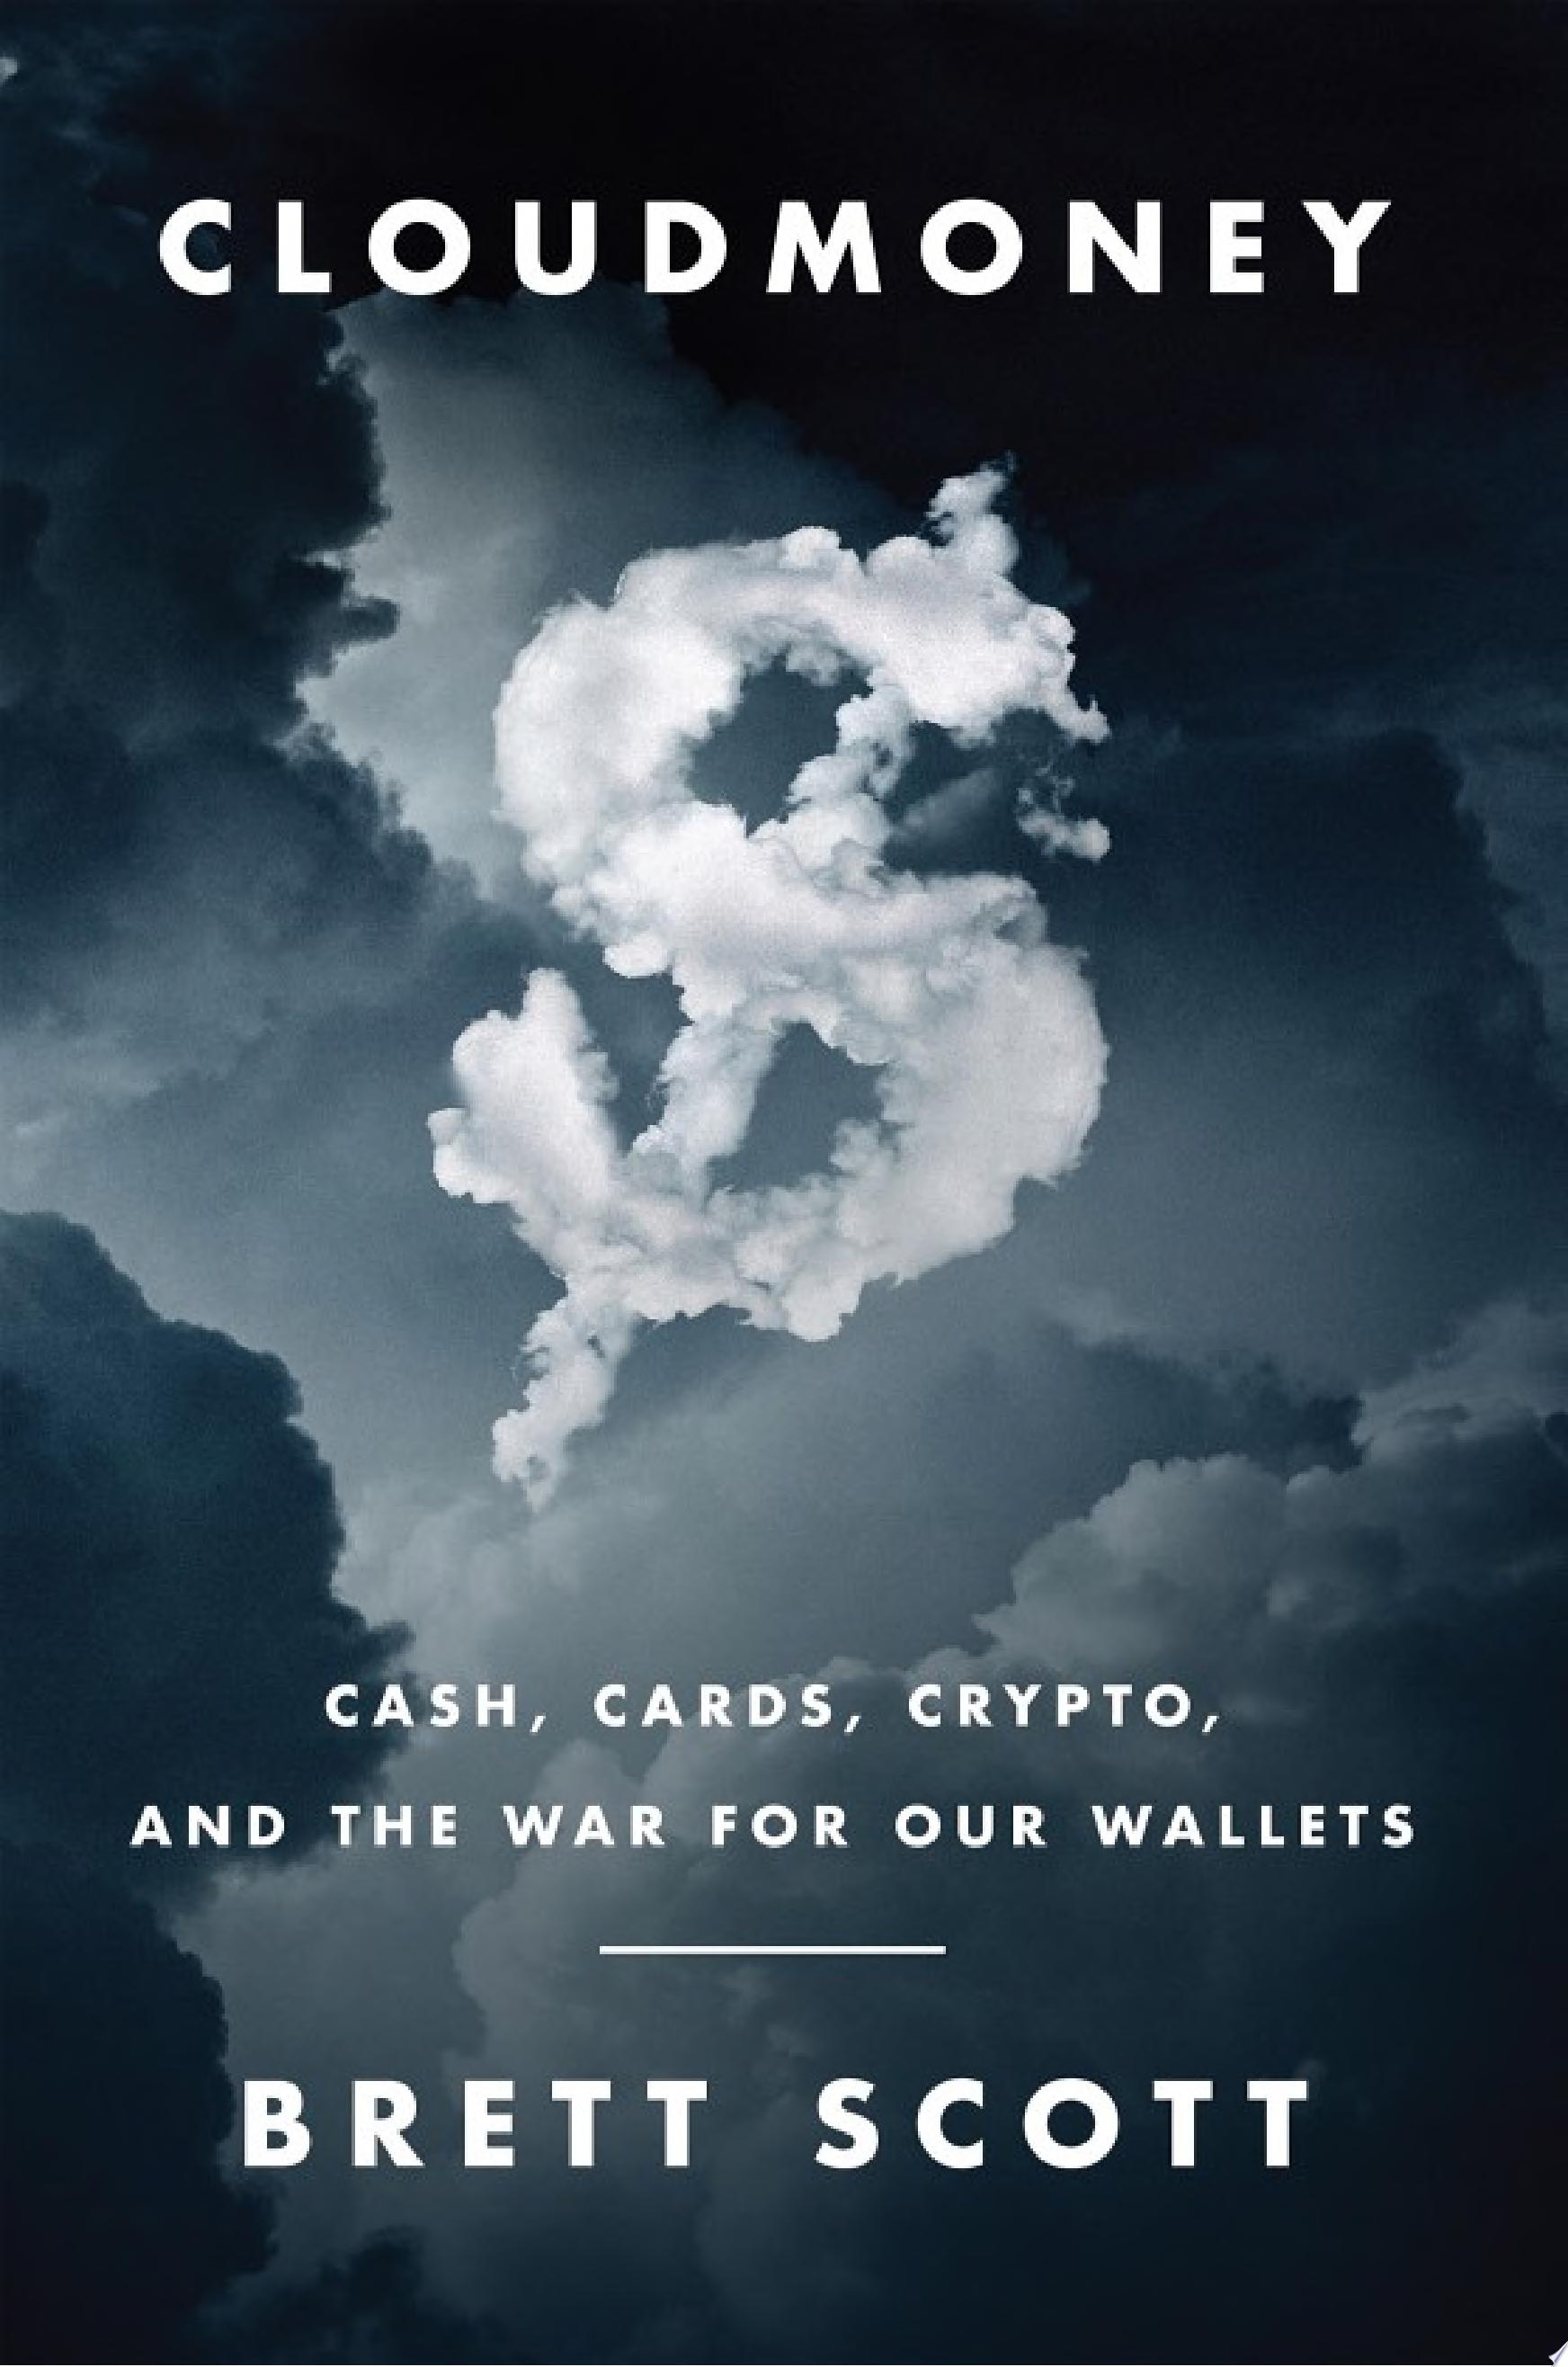 Image for "Cloudmoney"